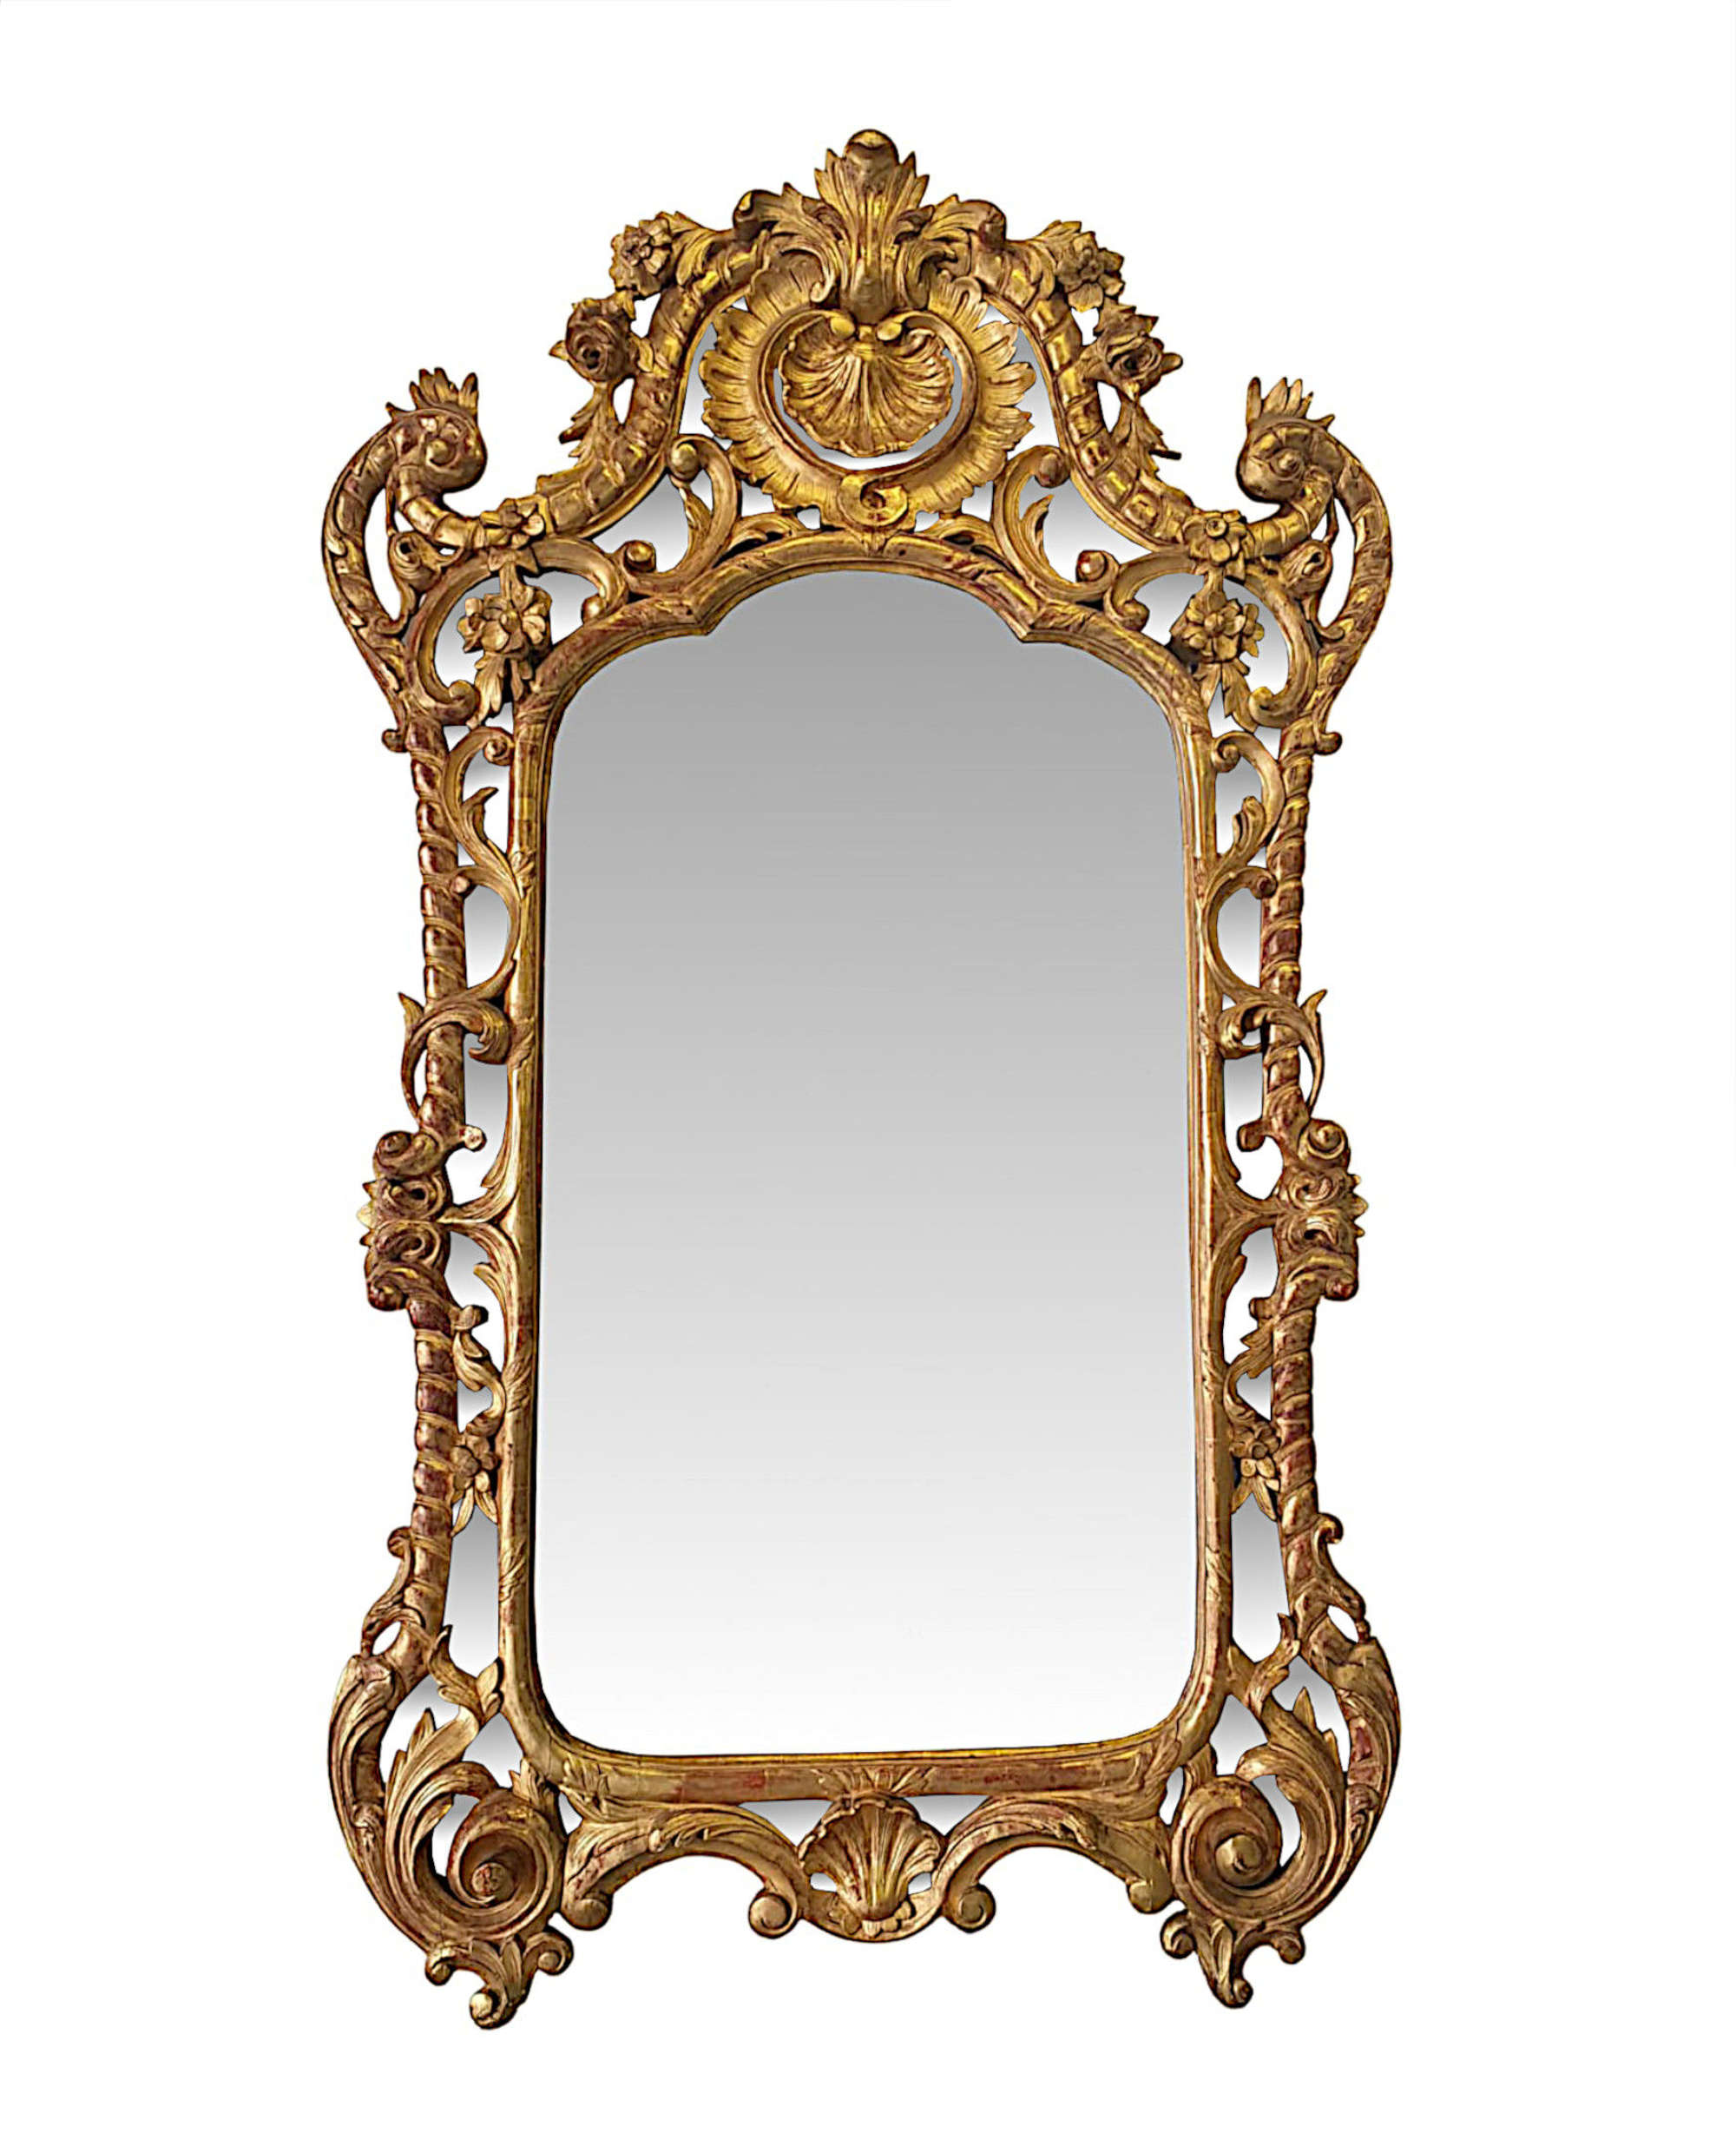 A Rare And Exceptional Large Early 19th Century Giltwood Antique Overmantle Mirror